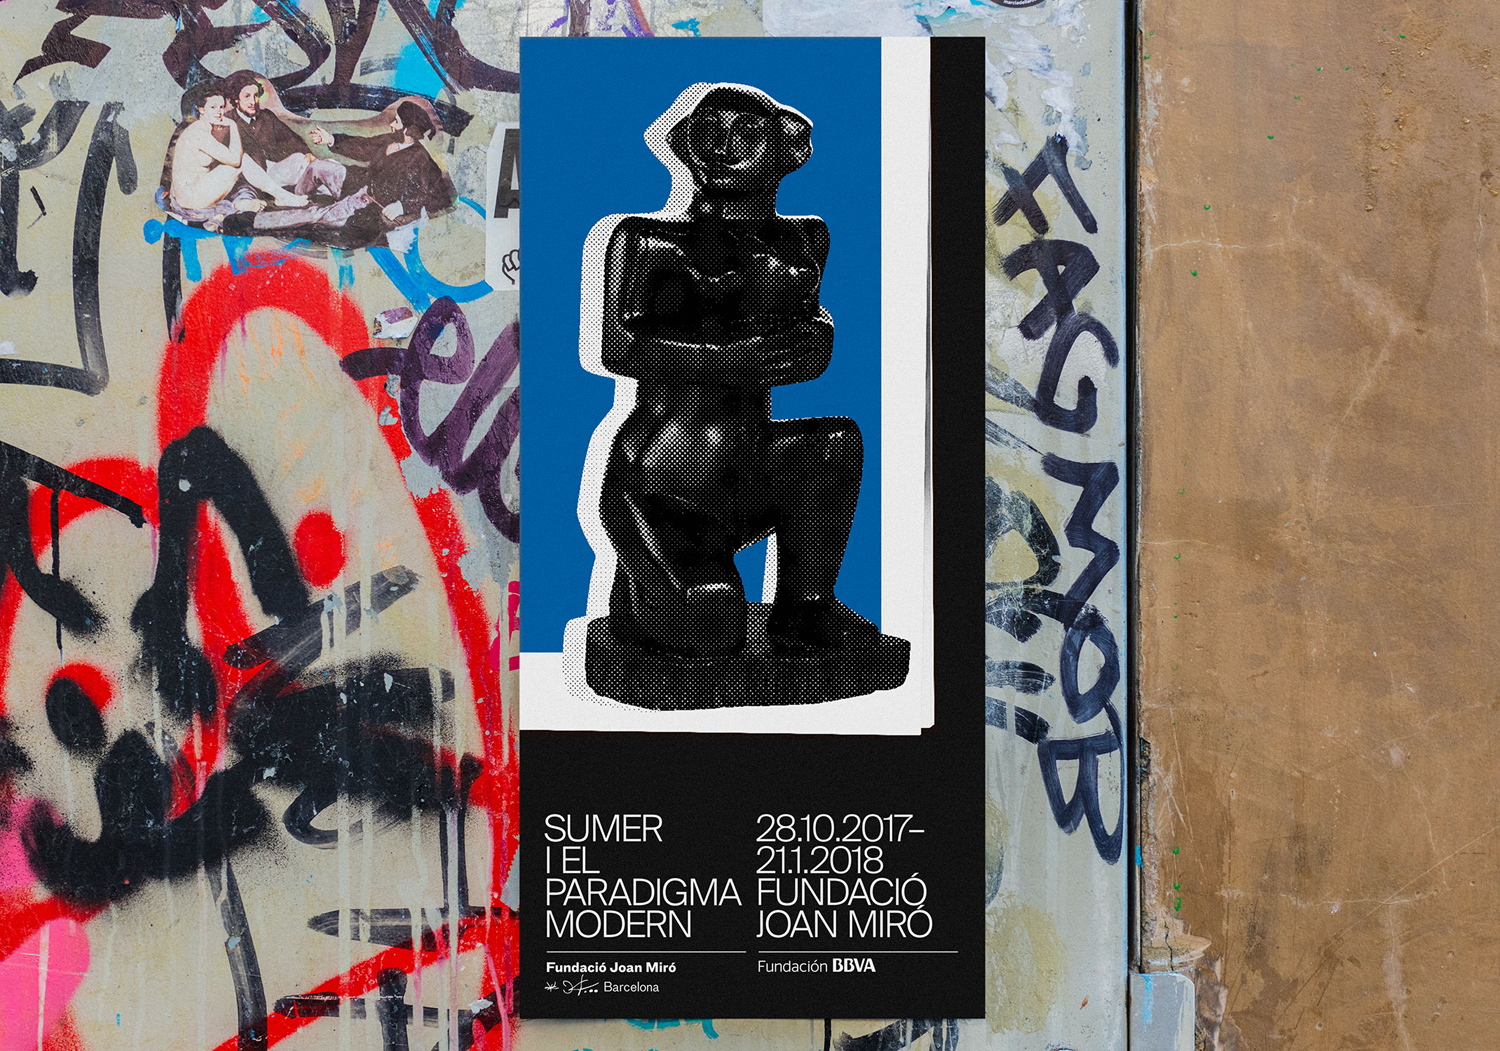 Graphic identity and posters by Clase bcn for exhibition Sumer And The Modern Paradigm